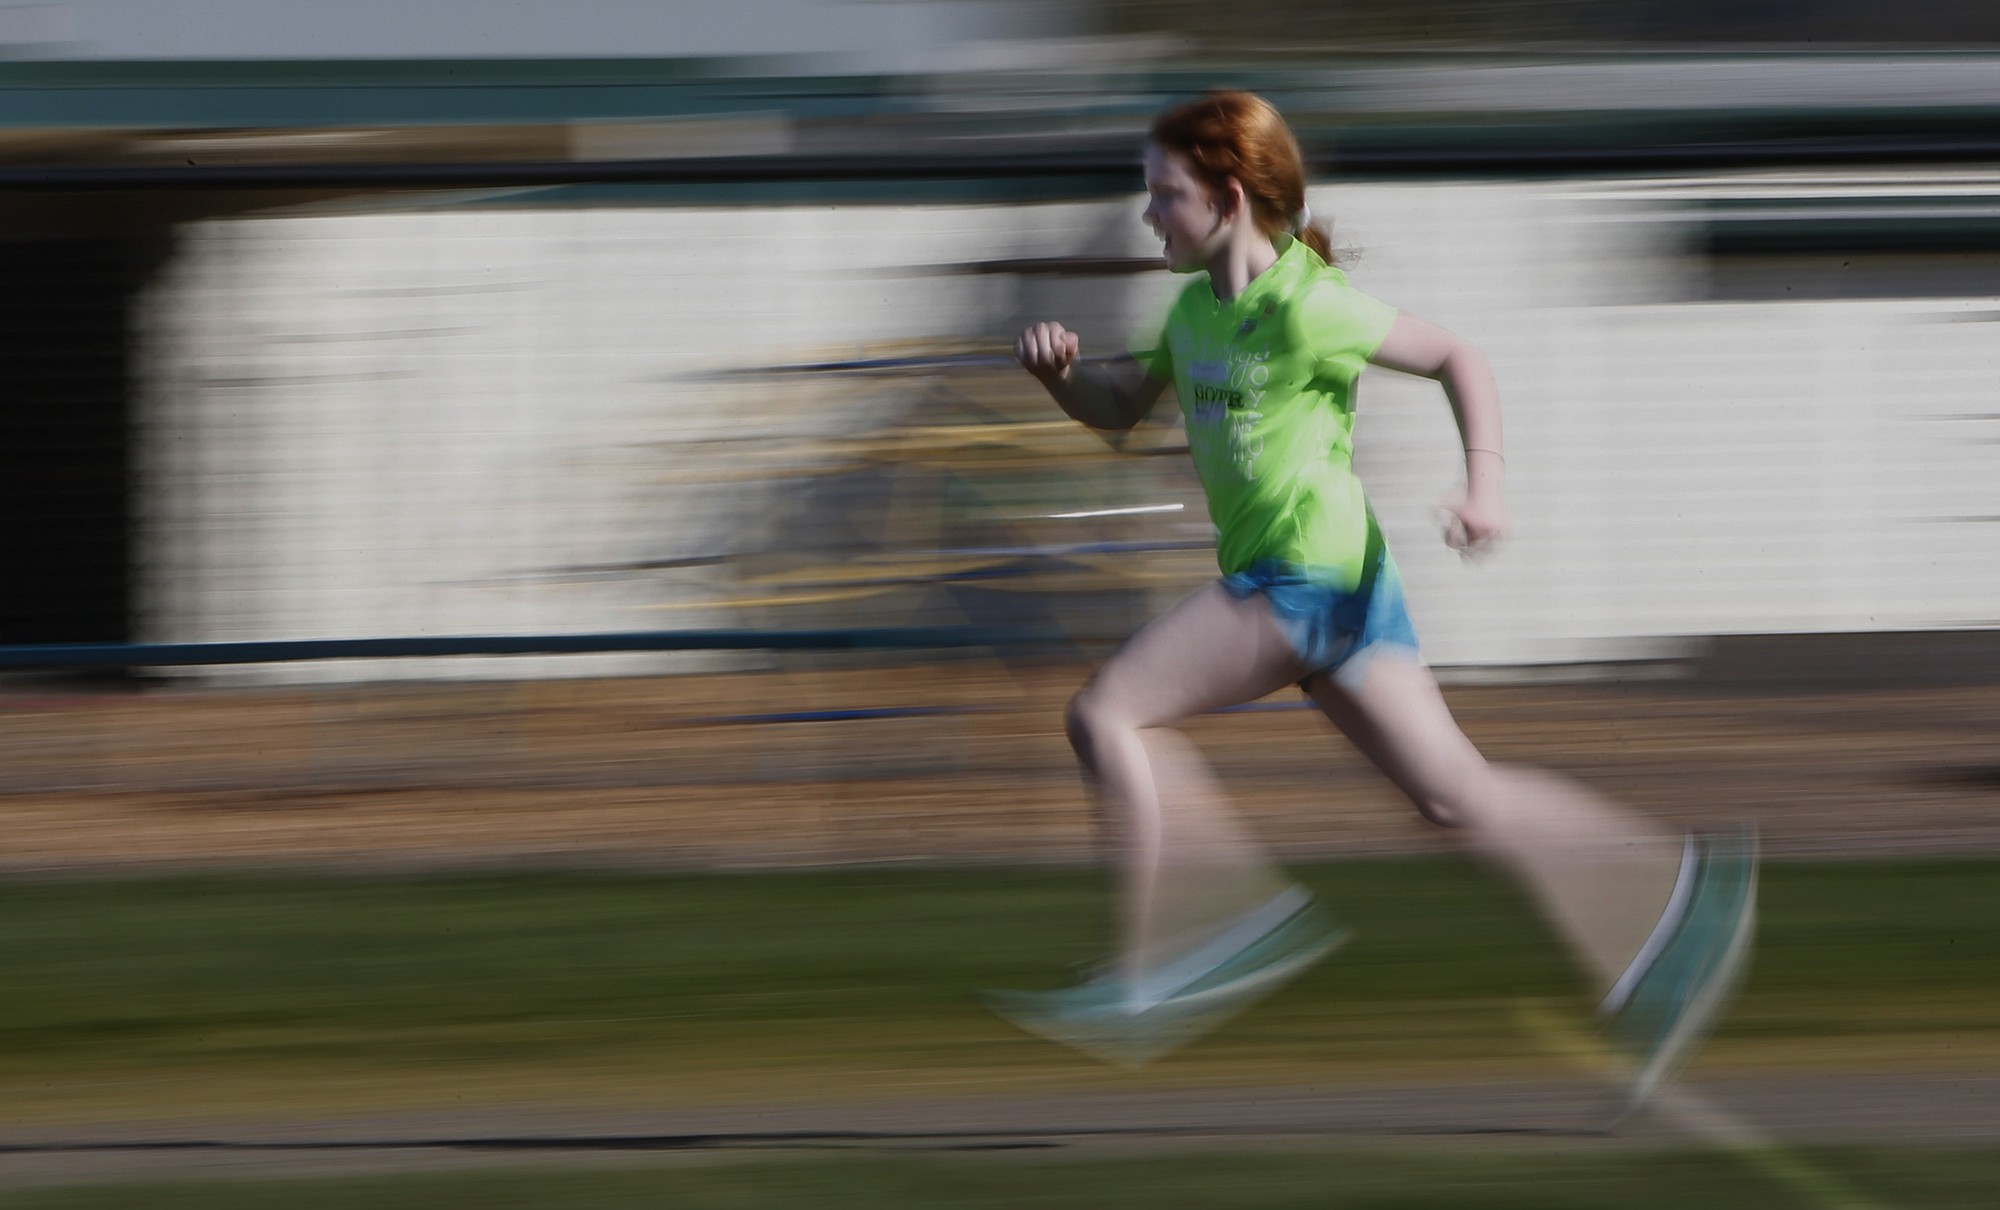 Anneliese Lewis, a fourth-grader at Coburg Community Charter School in Coburg, Ore., runs a lap around the school's track during Girls on the Run practice on March 12.